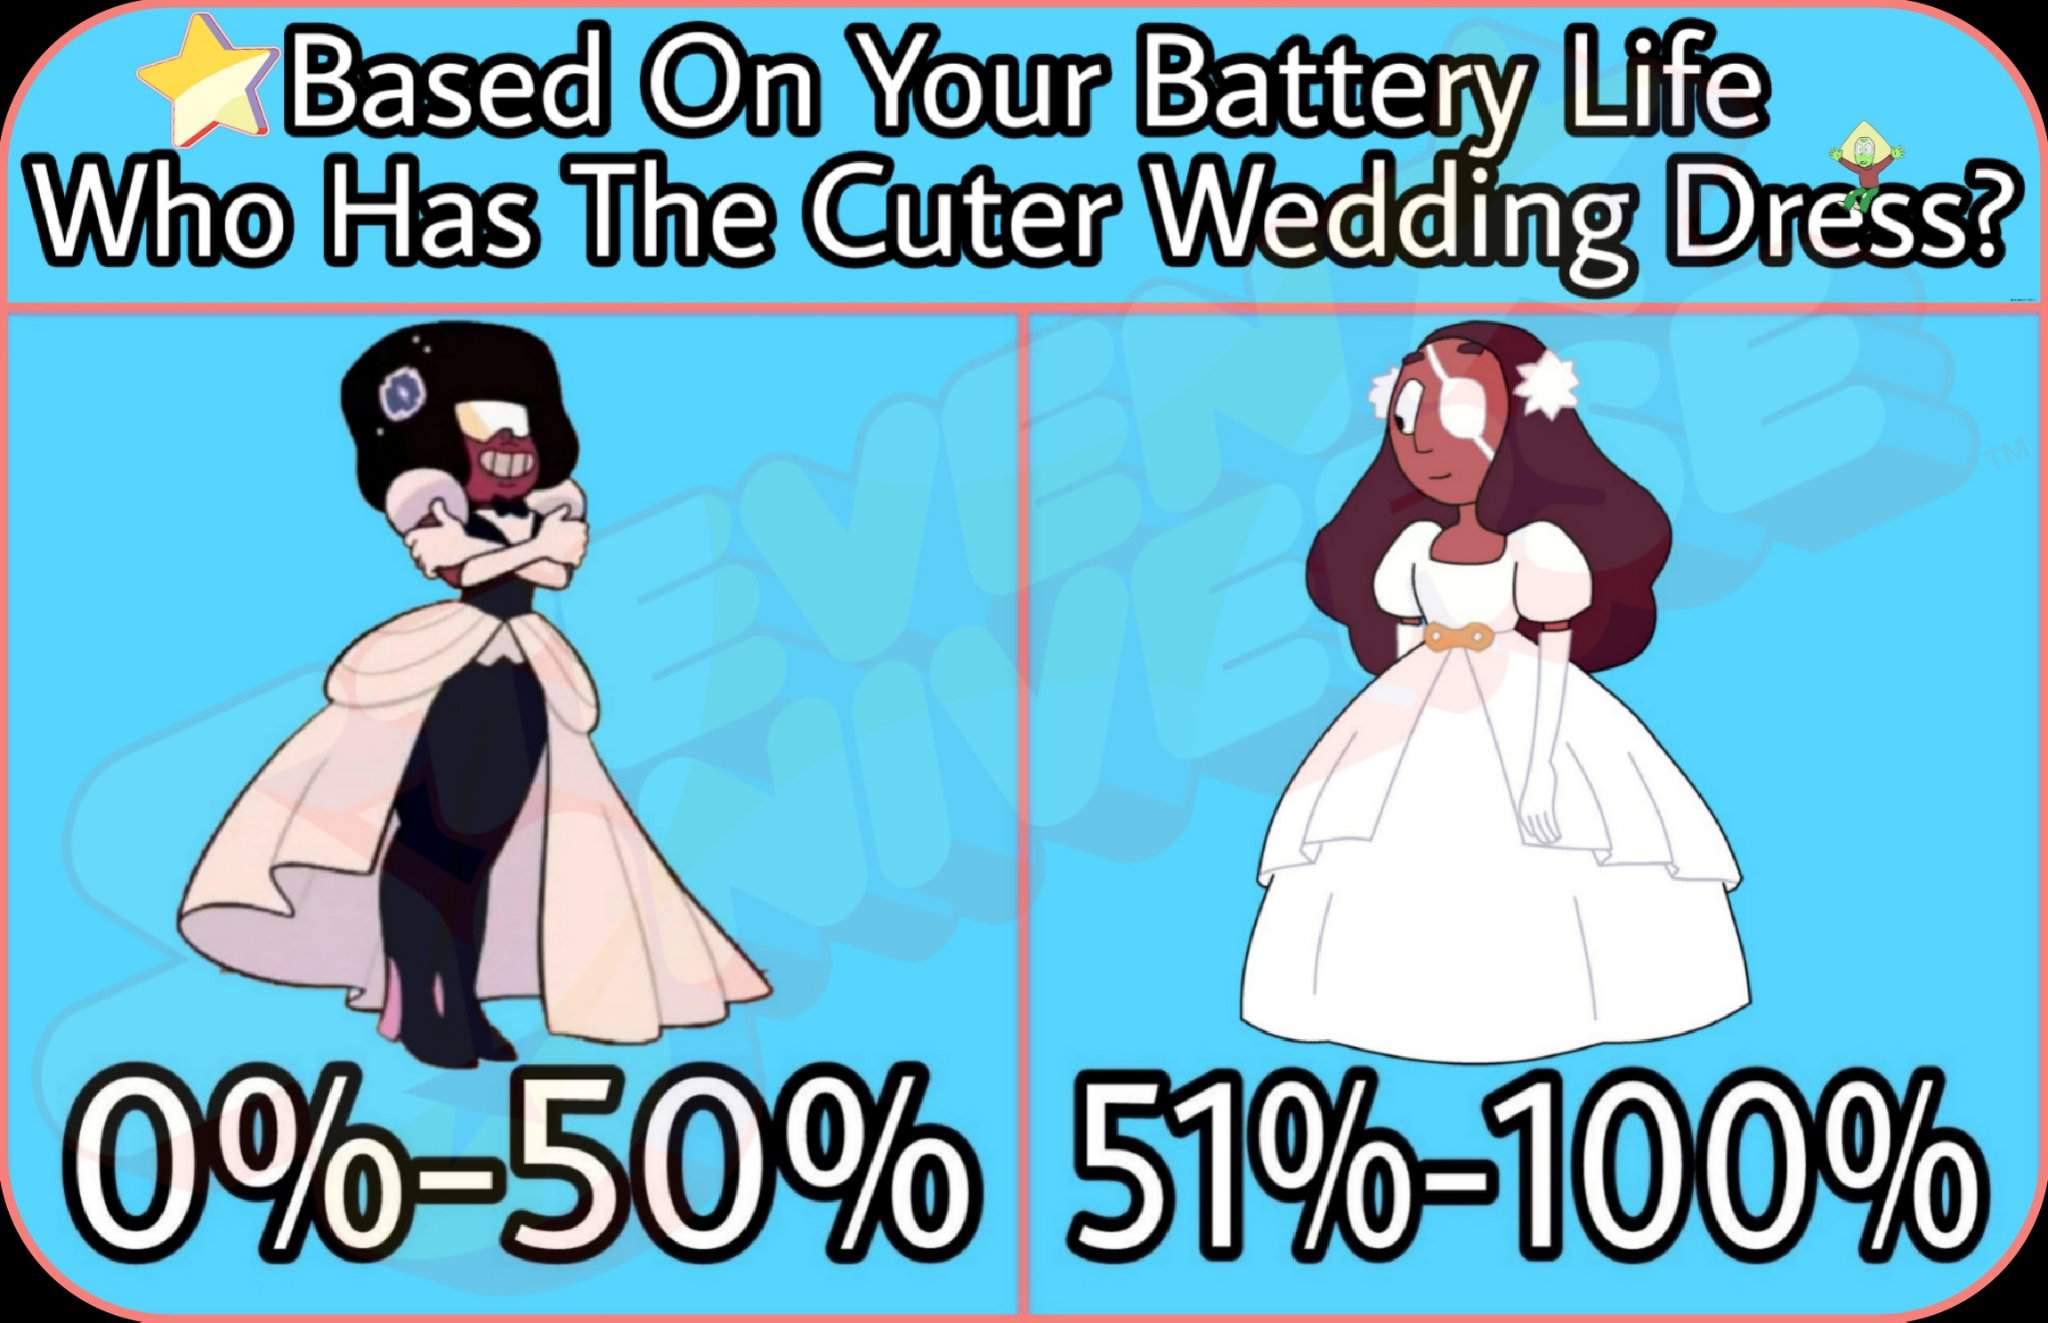 Based On Your Battery Life, Who Has The Cuter Wedding Dress ...